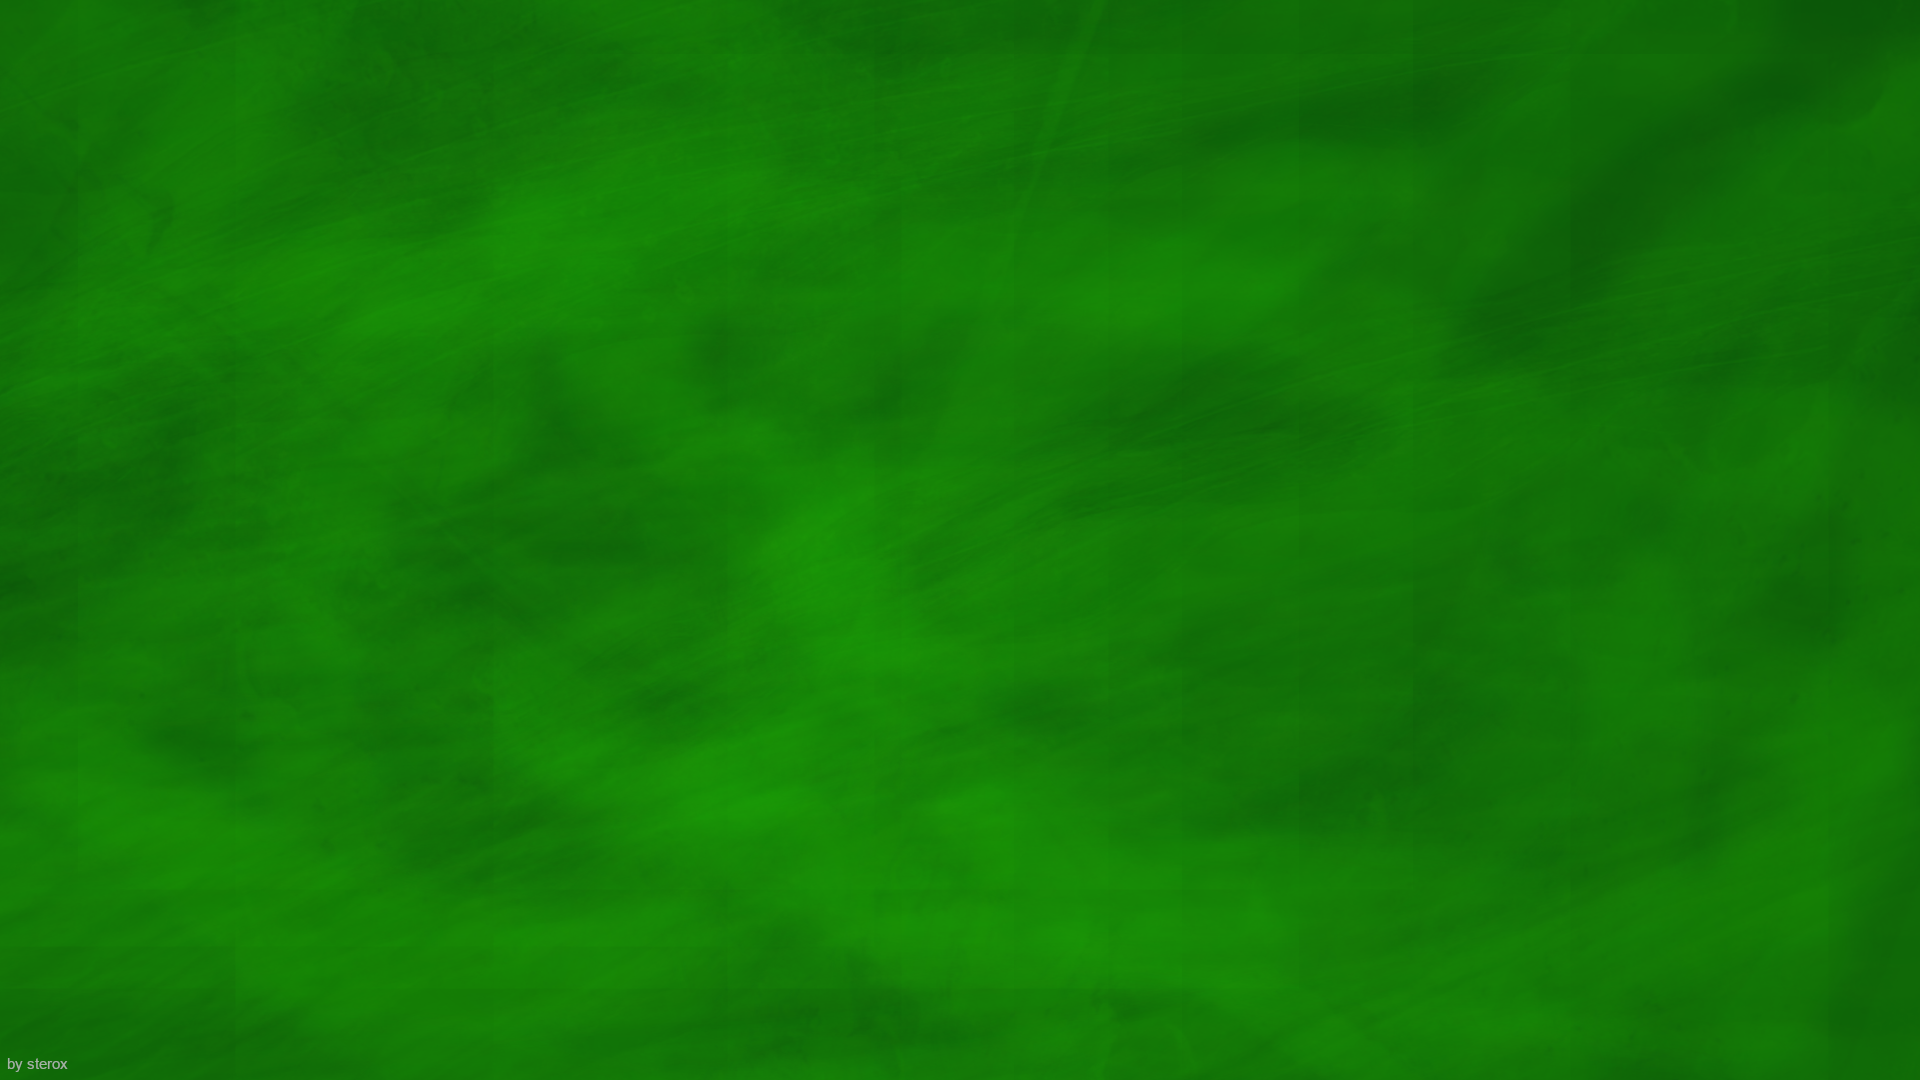 General 1920x1080 green green background simple background